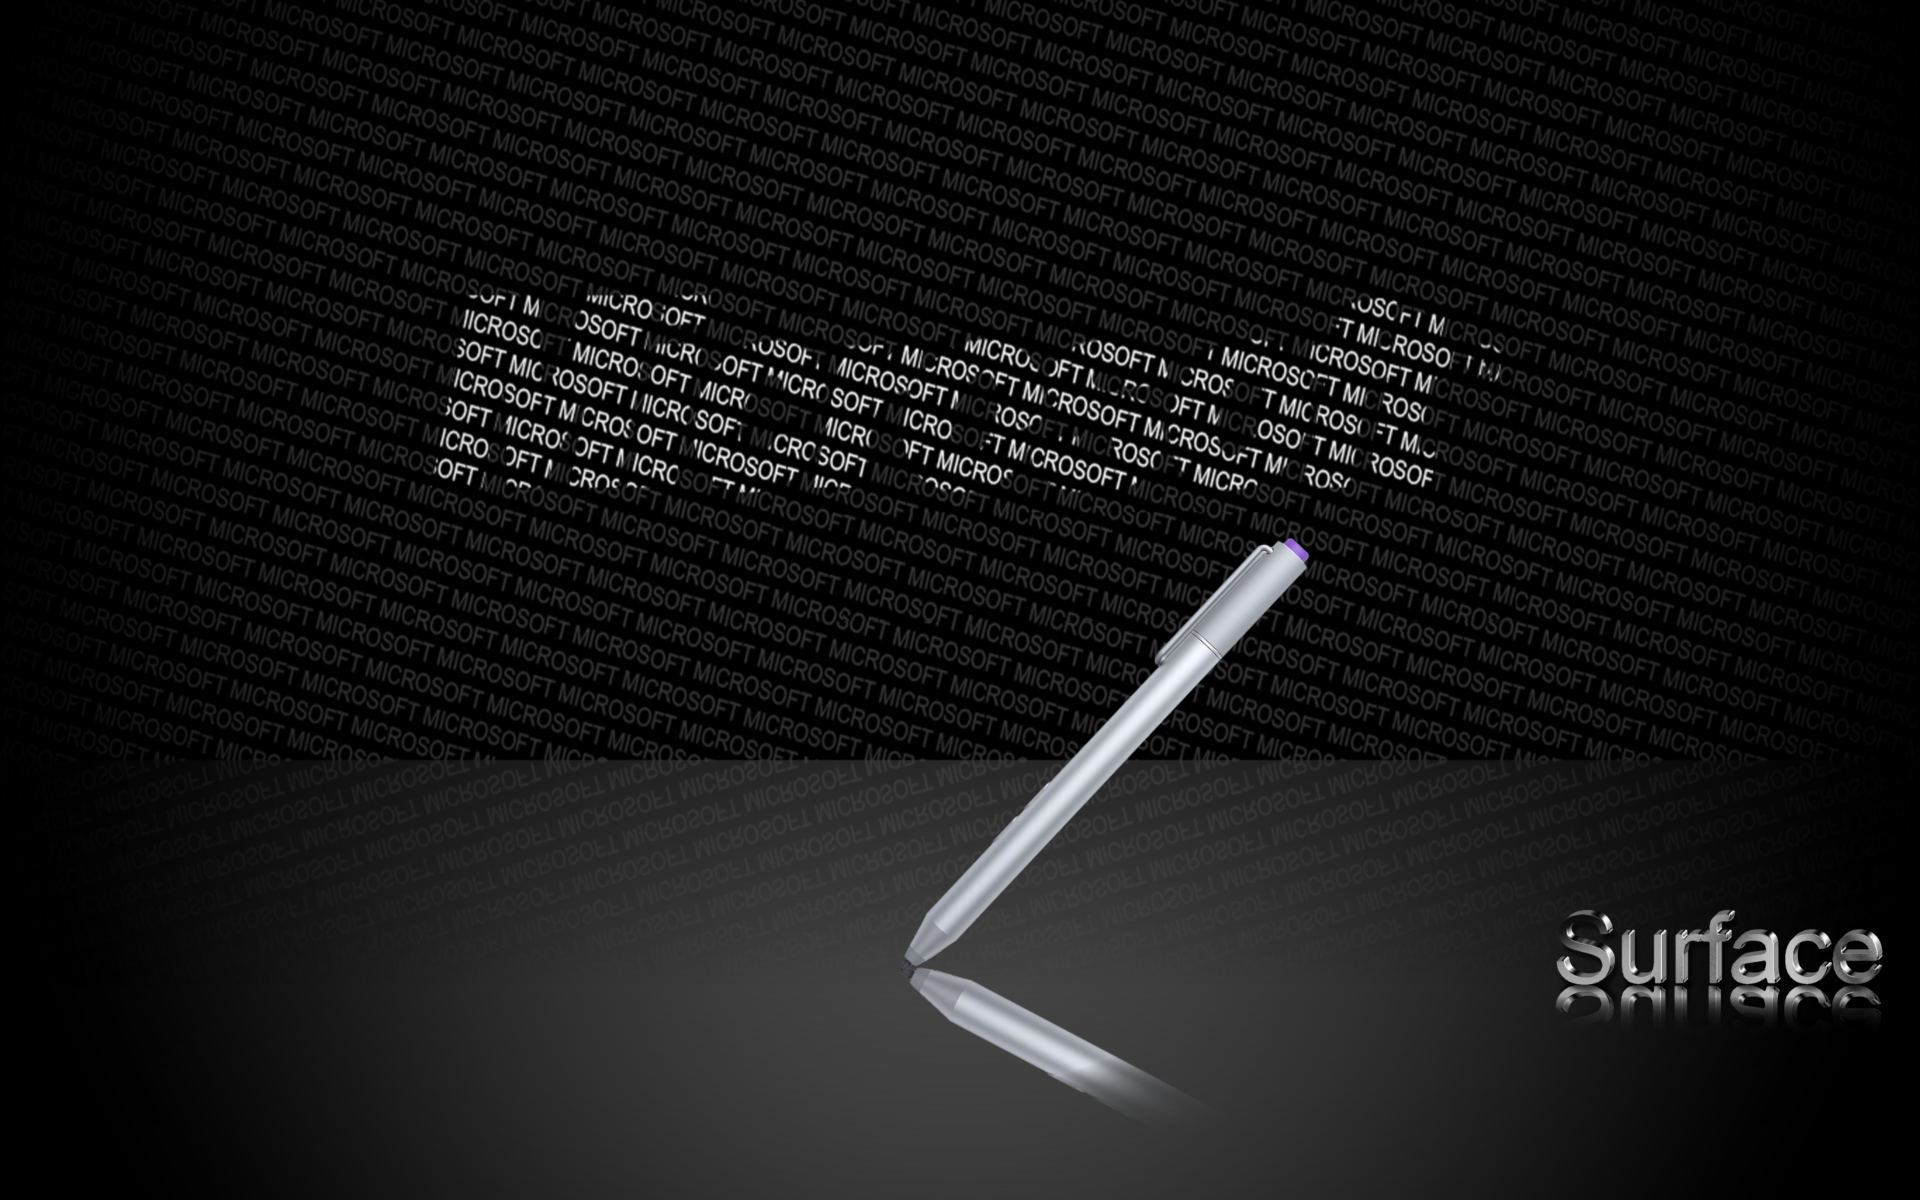 Microsoft Surface Wallpapers Group 70